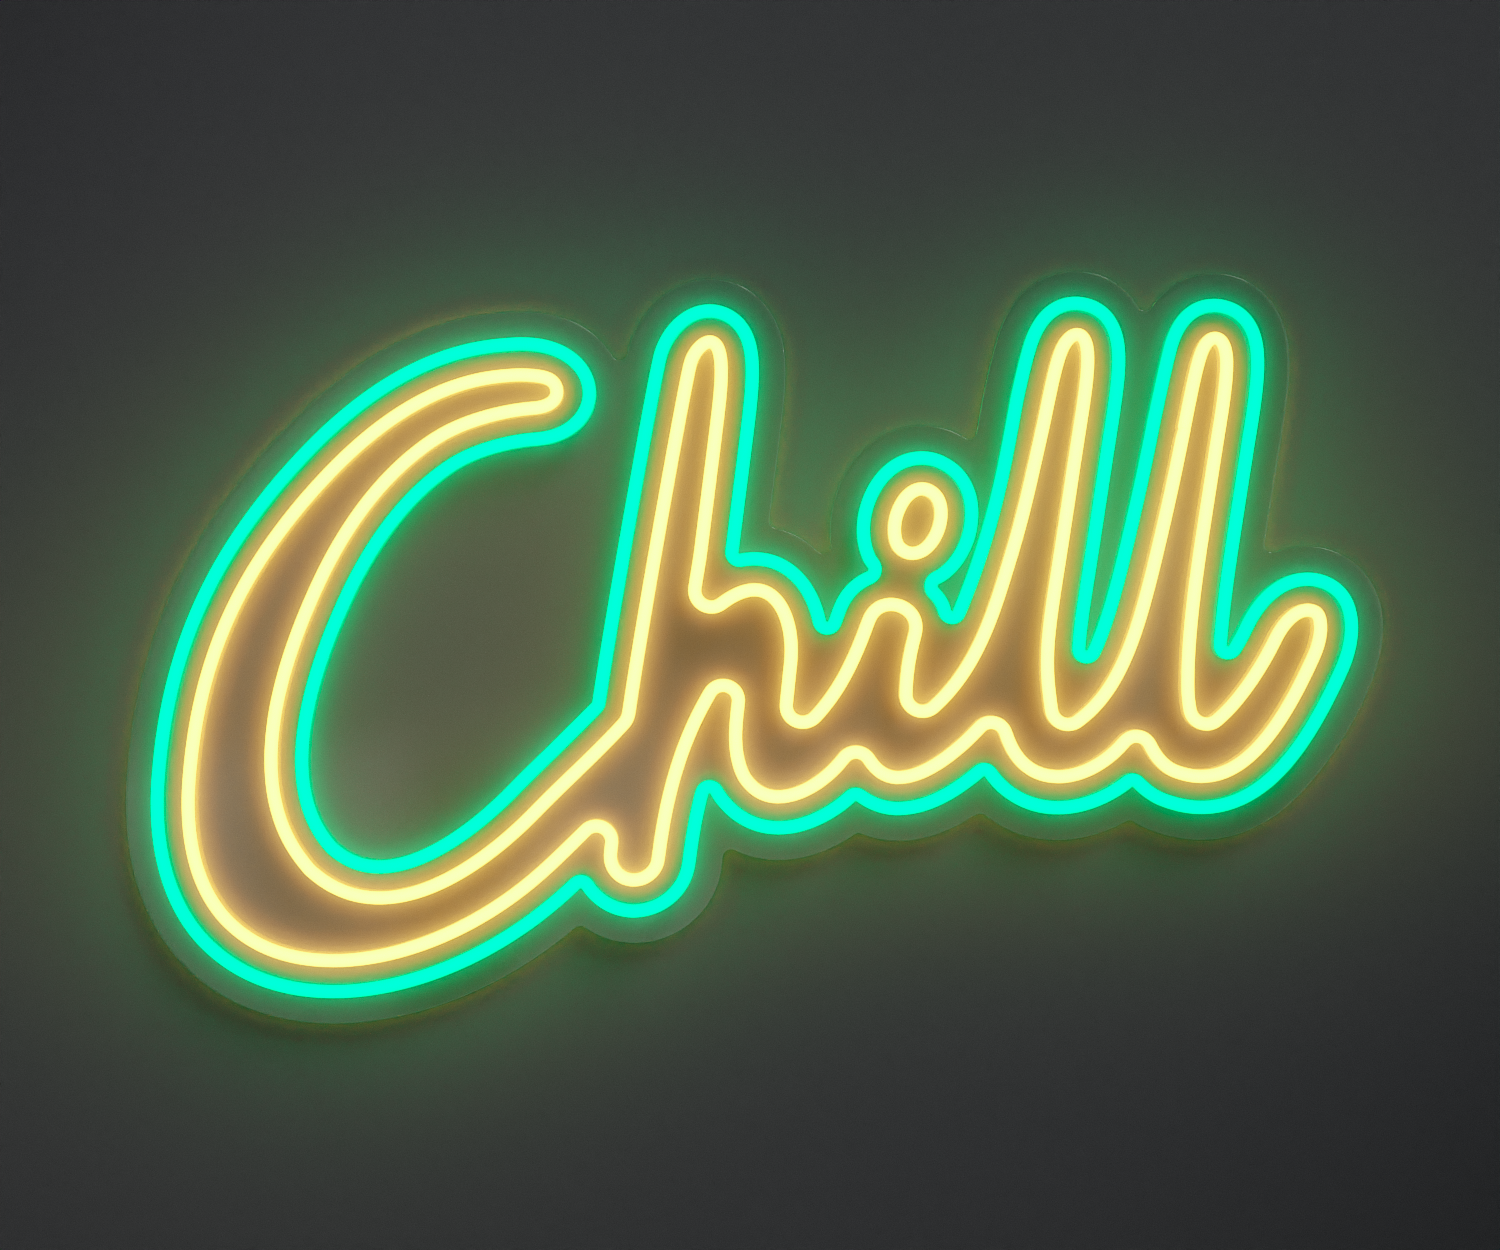 turquoise and warm white neon sign that says chill